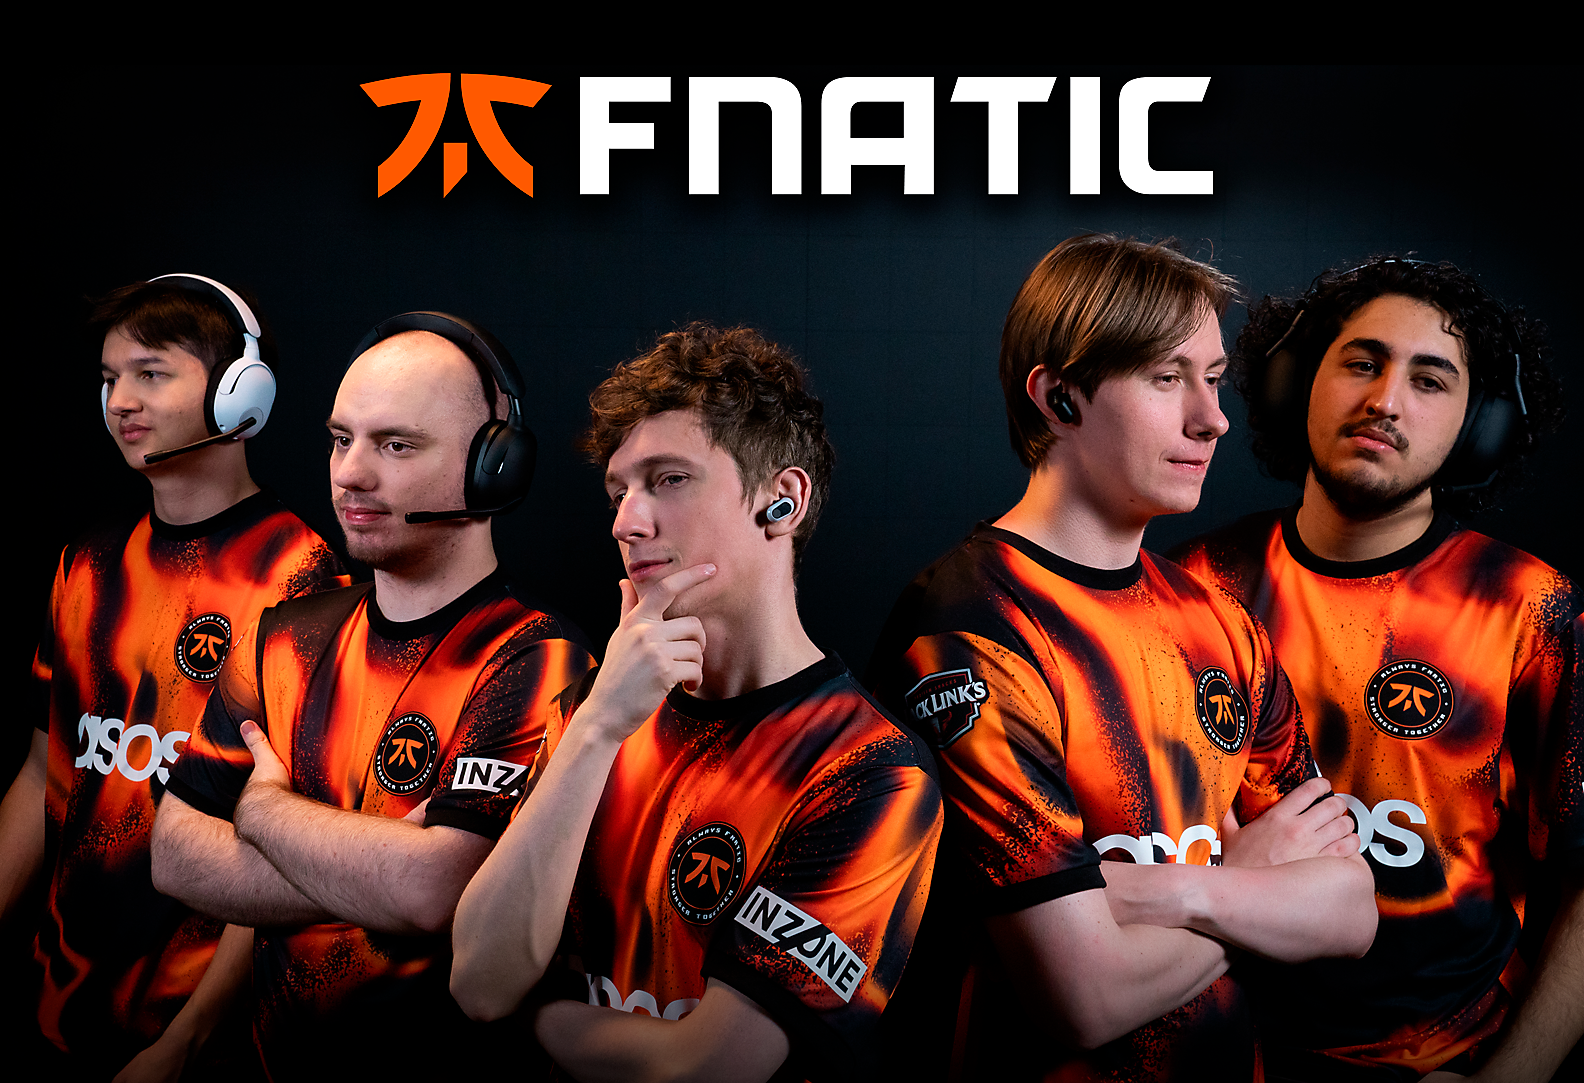 Image of the Fnatic VALORANT team on a dark background with the Fnatic logo in front